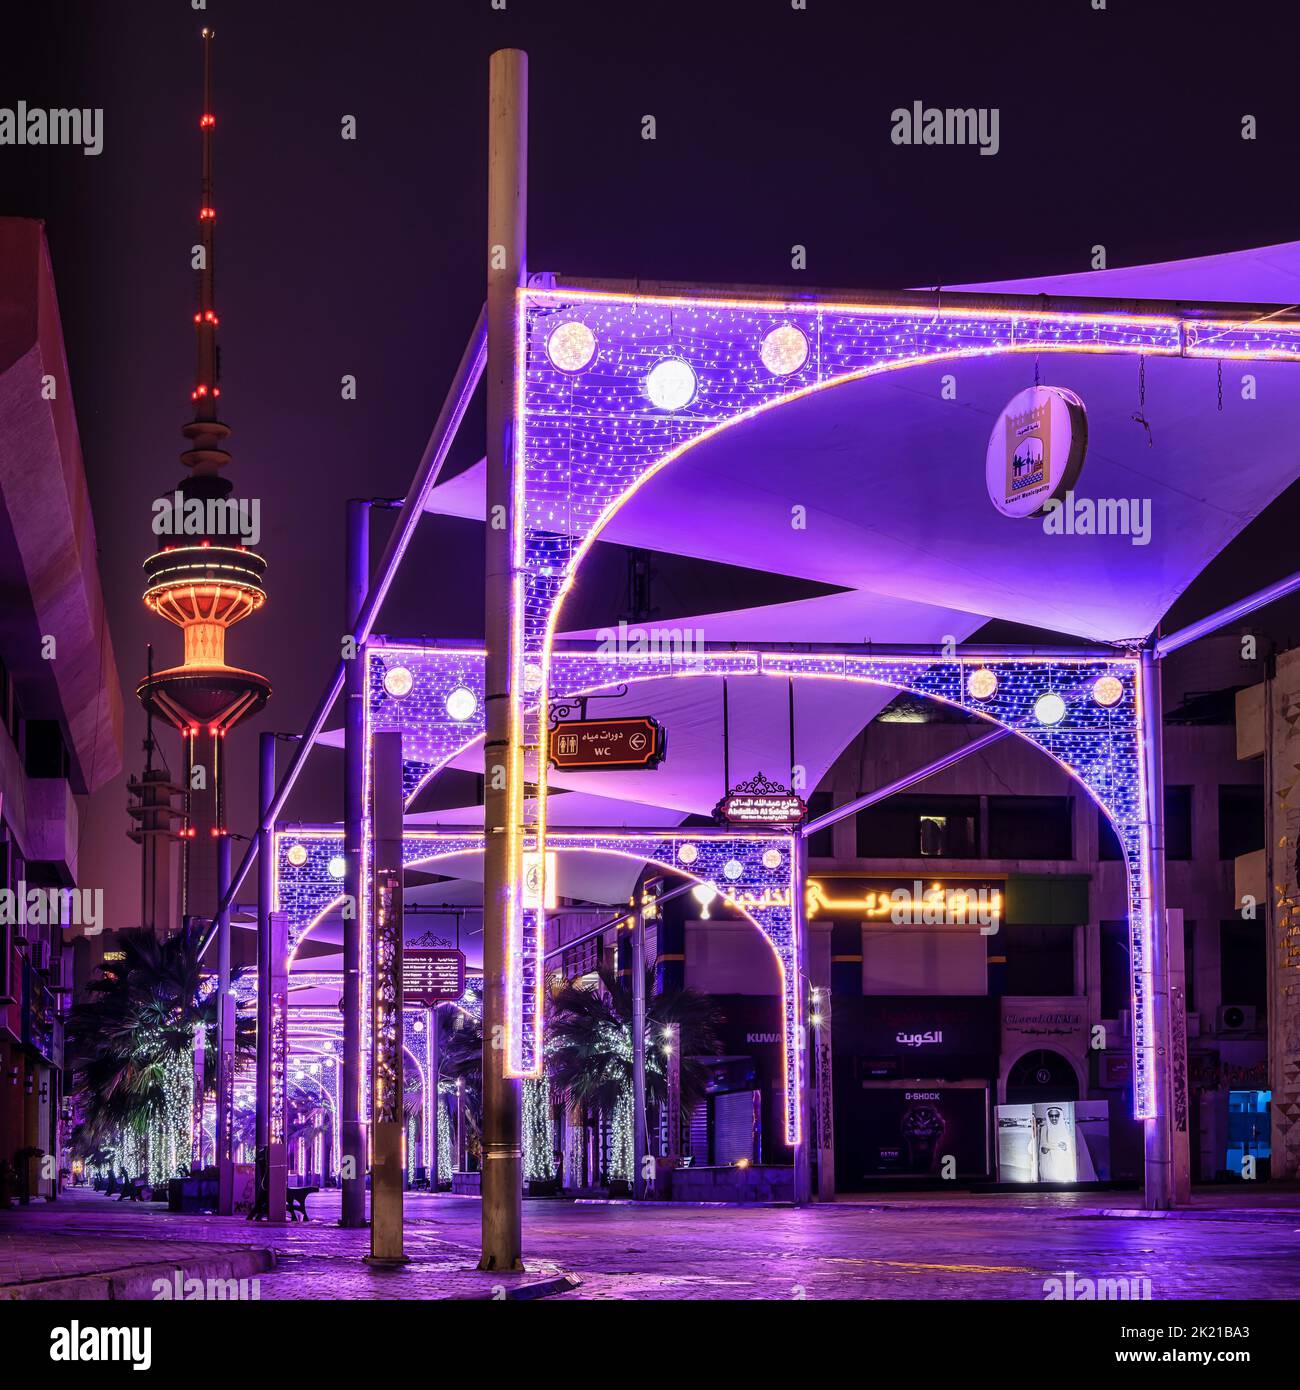 A shot of a purple lighten shopping street with the Liberation Tower in the background at night in Kuwait Stock Photo